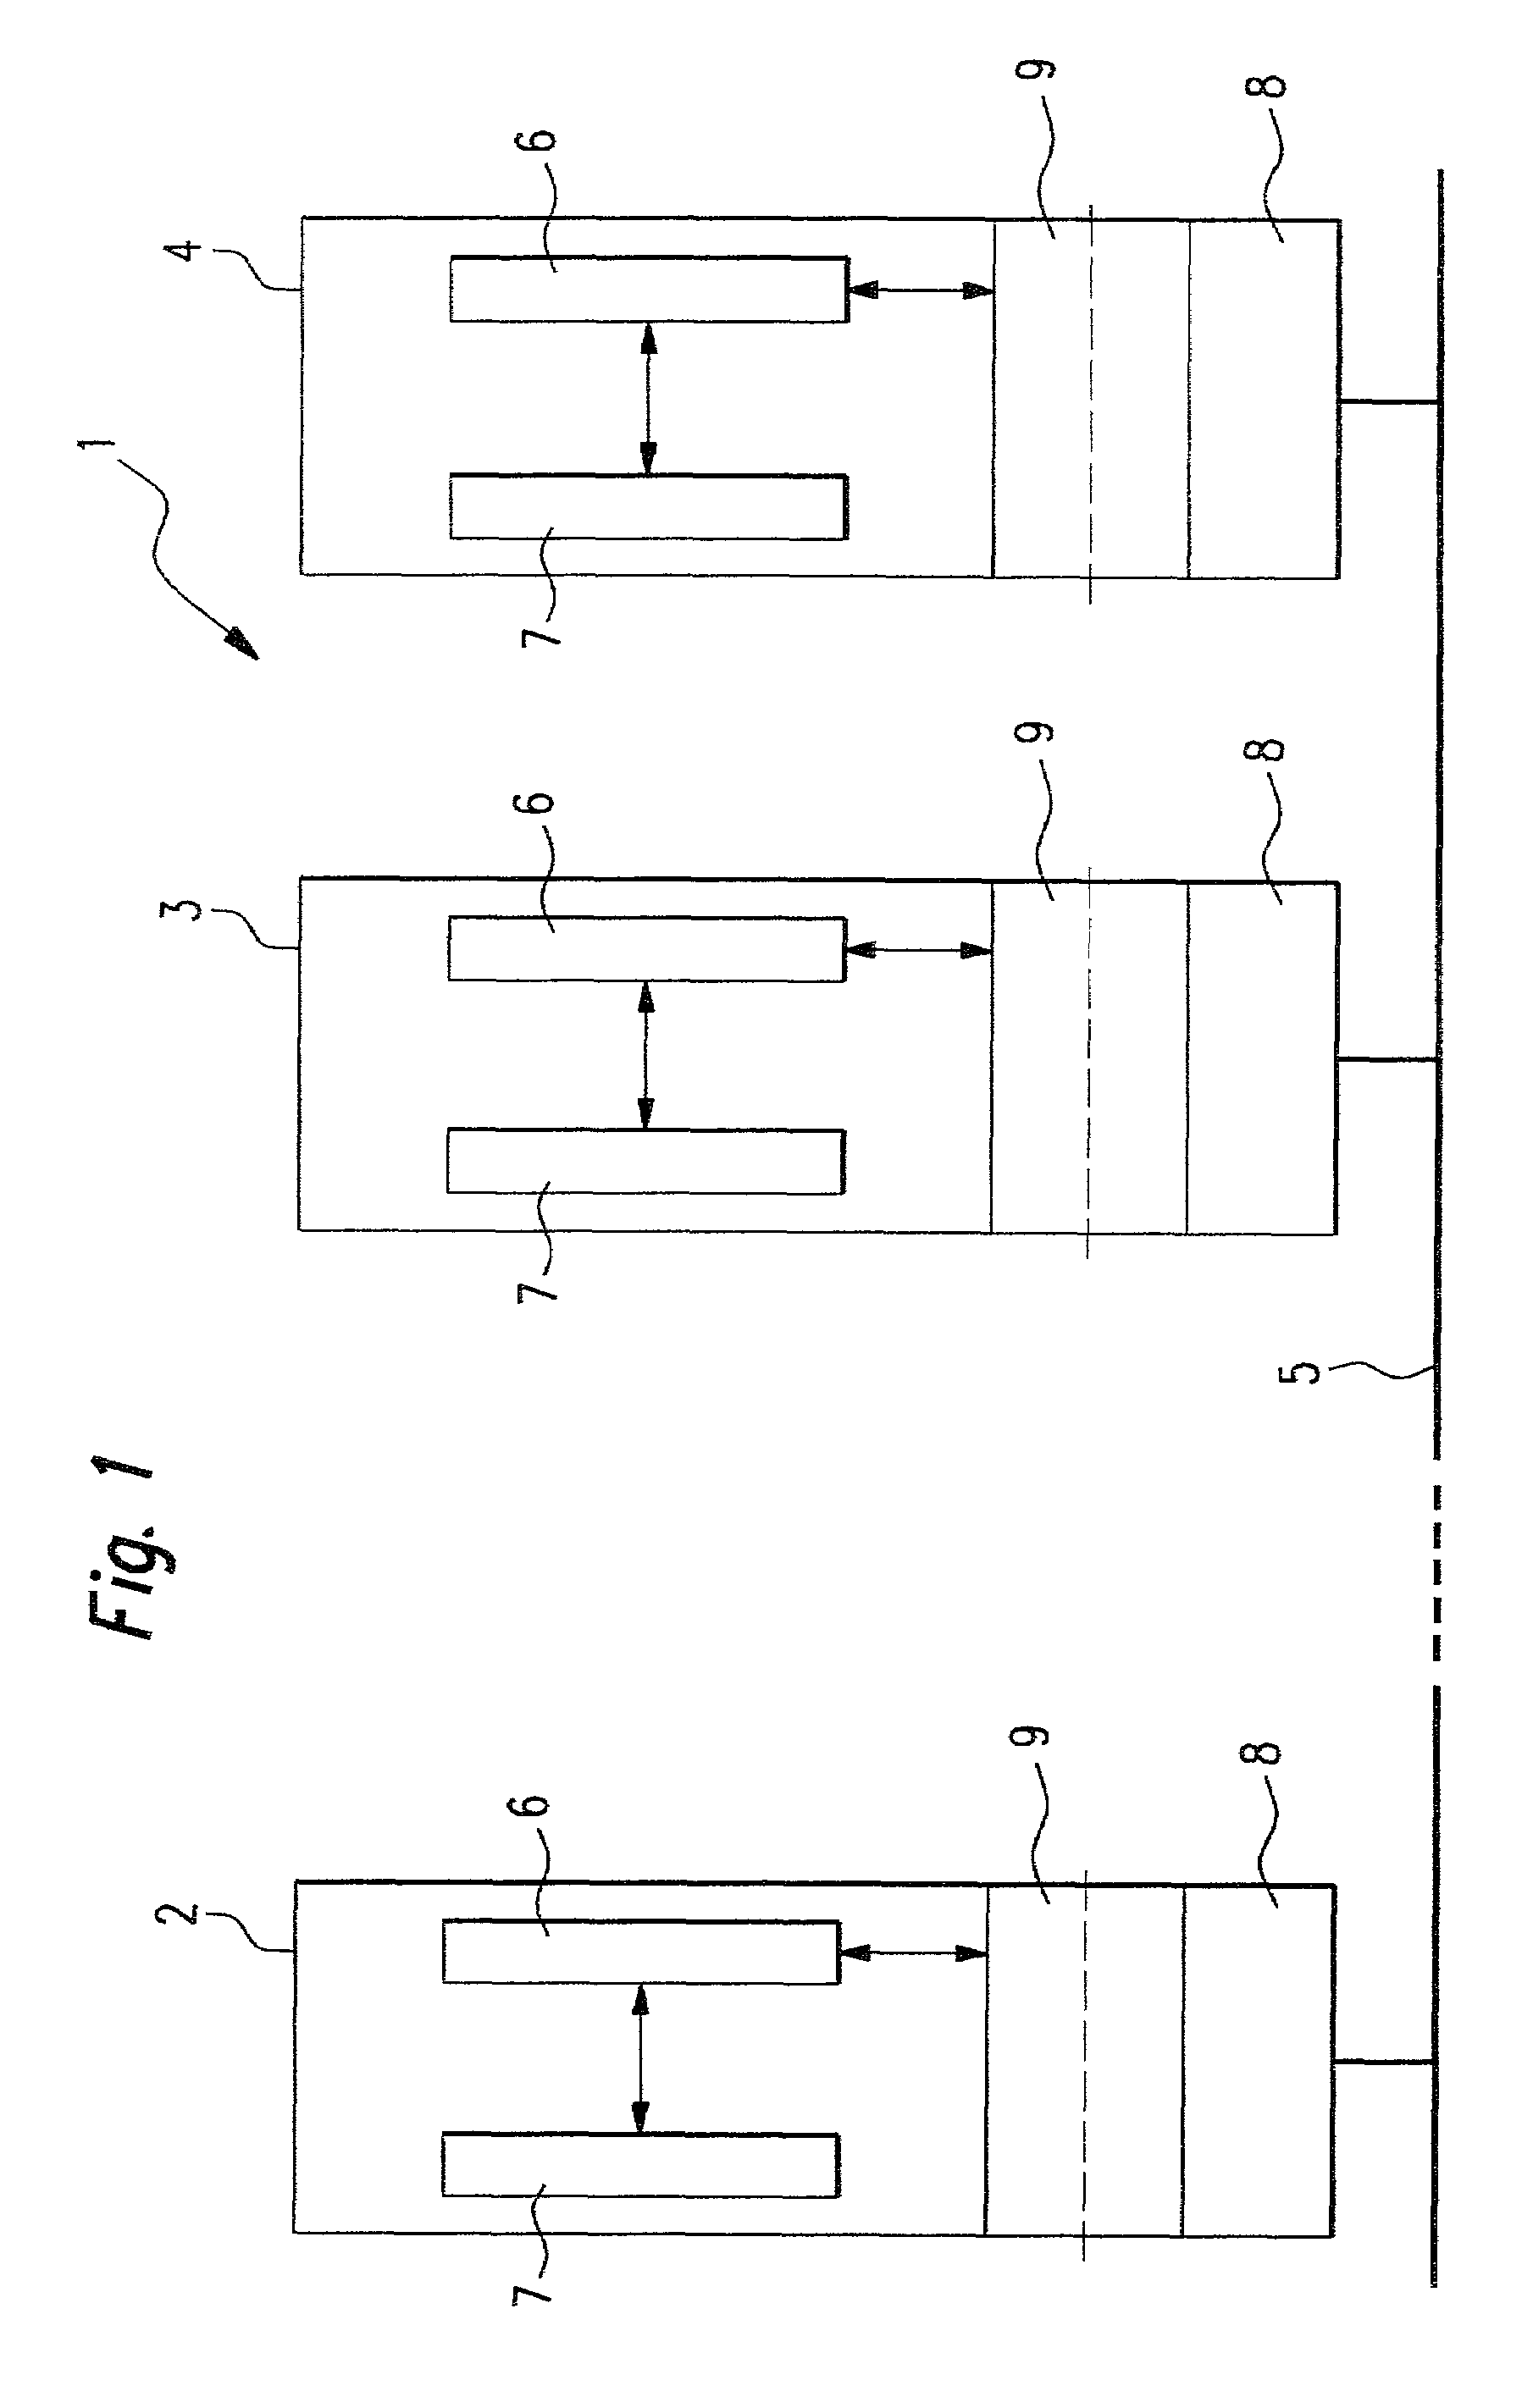 Method and communication system for data exchange among multiple users interconnected over a bus system